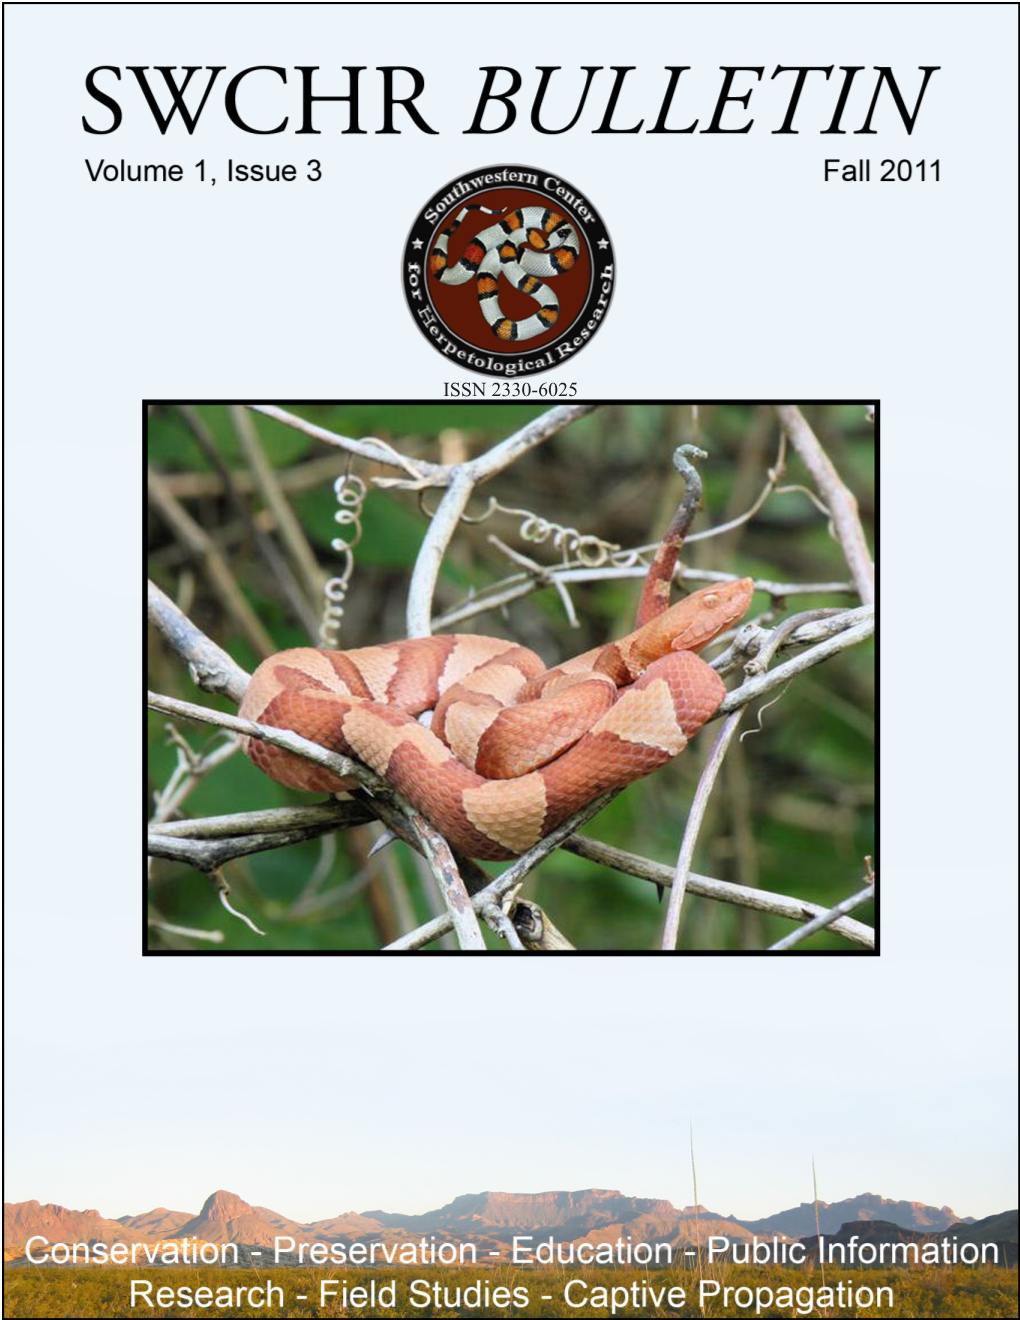 ISSN 2330-6025 SWCHR BULLETIN Published Quarterly by the SOUTHWESTERN CENTER for HERPETOLOGICAL RESEARCH (SWCHR) P.O